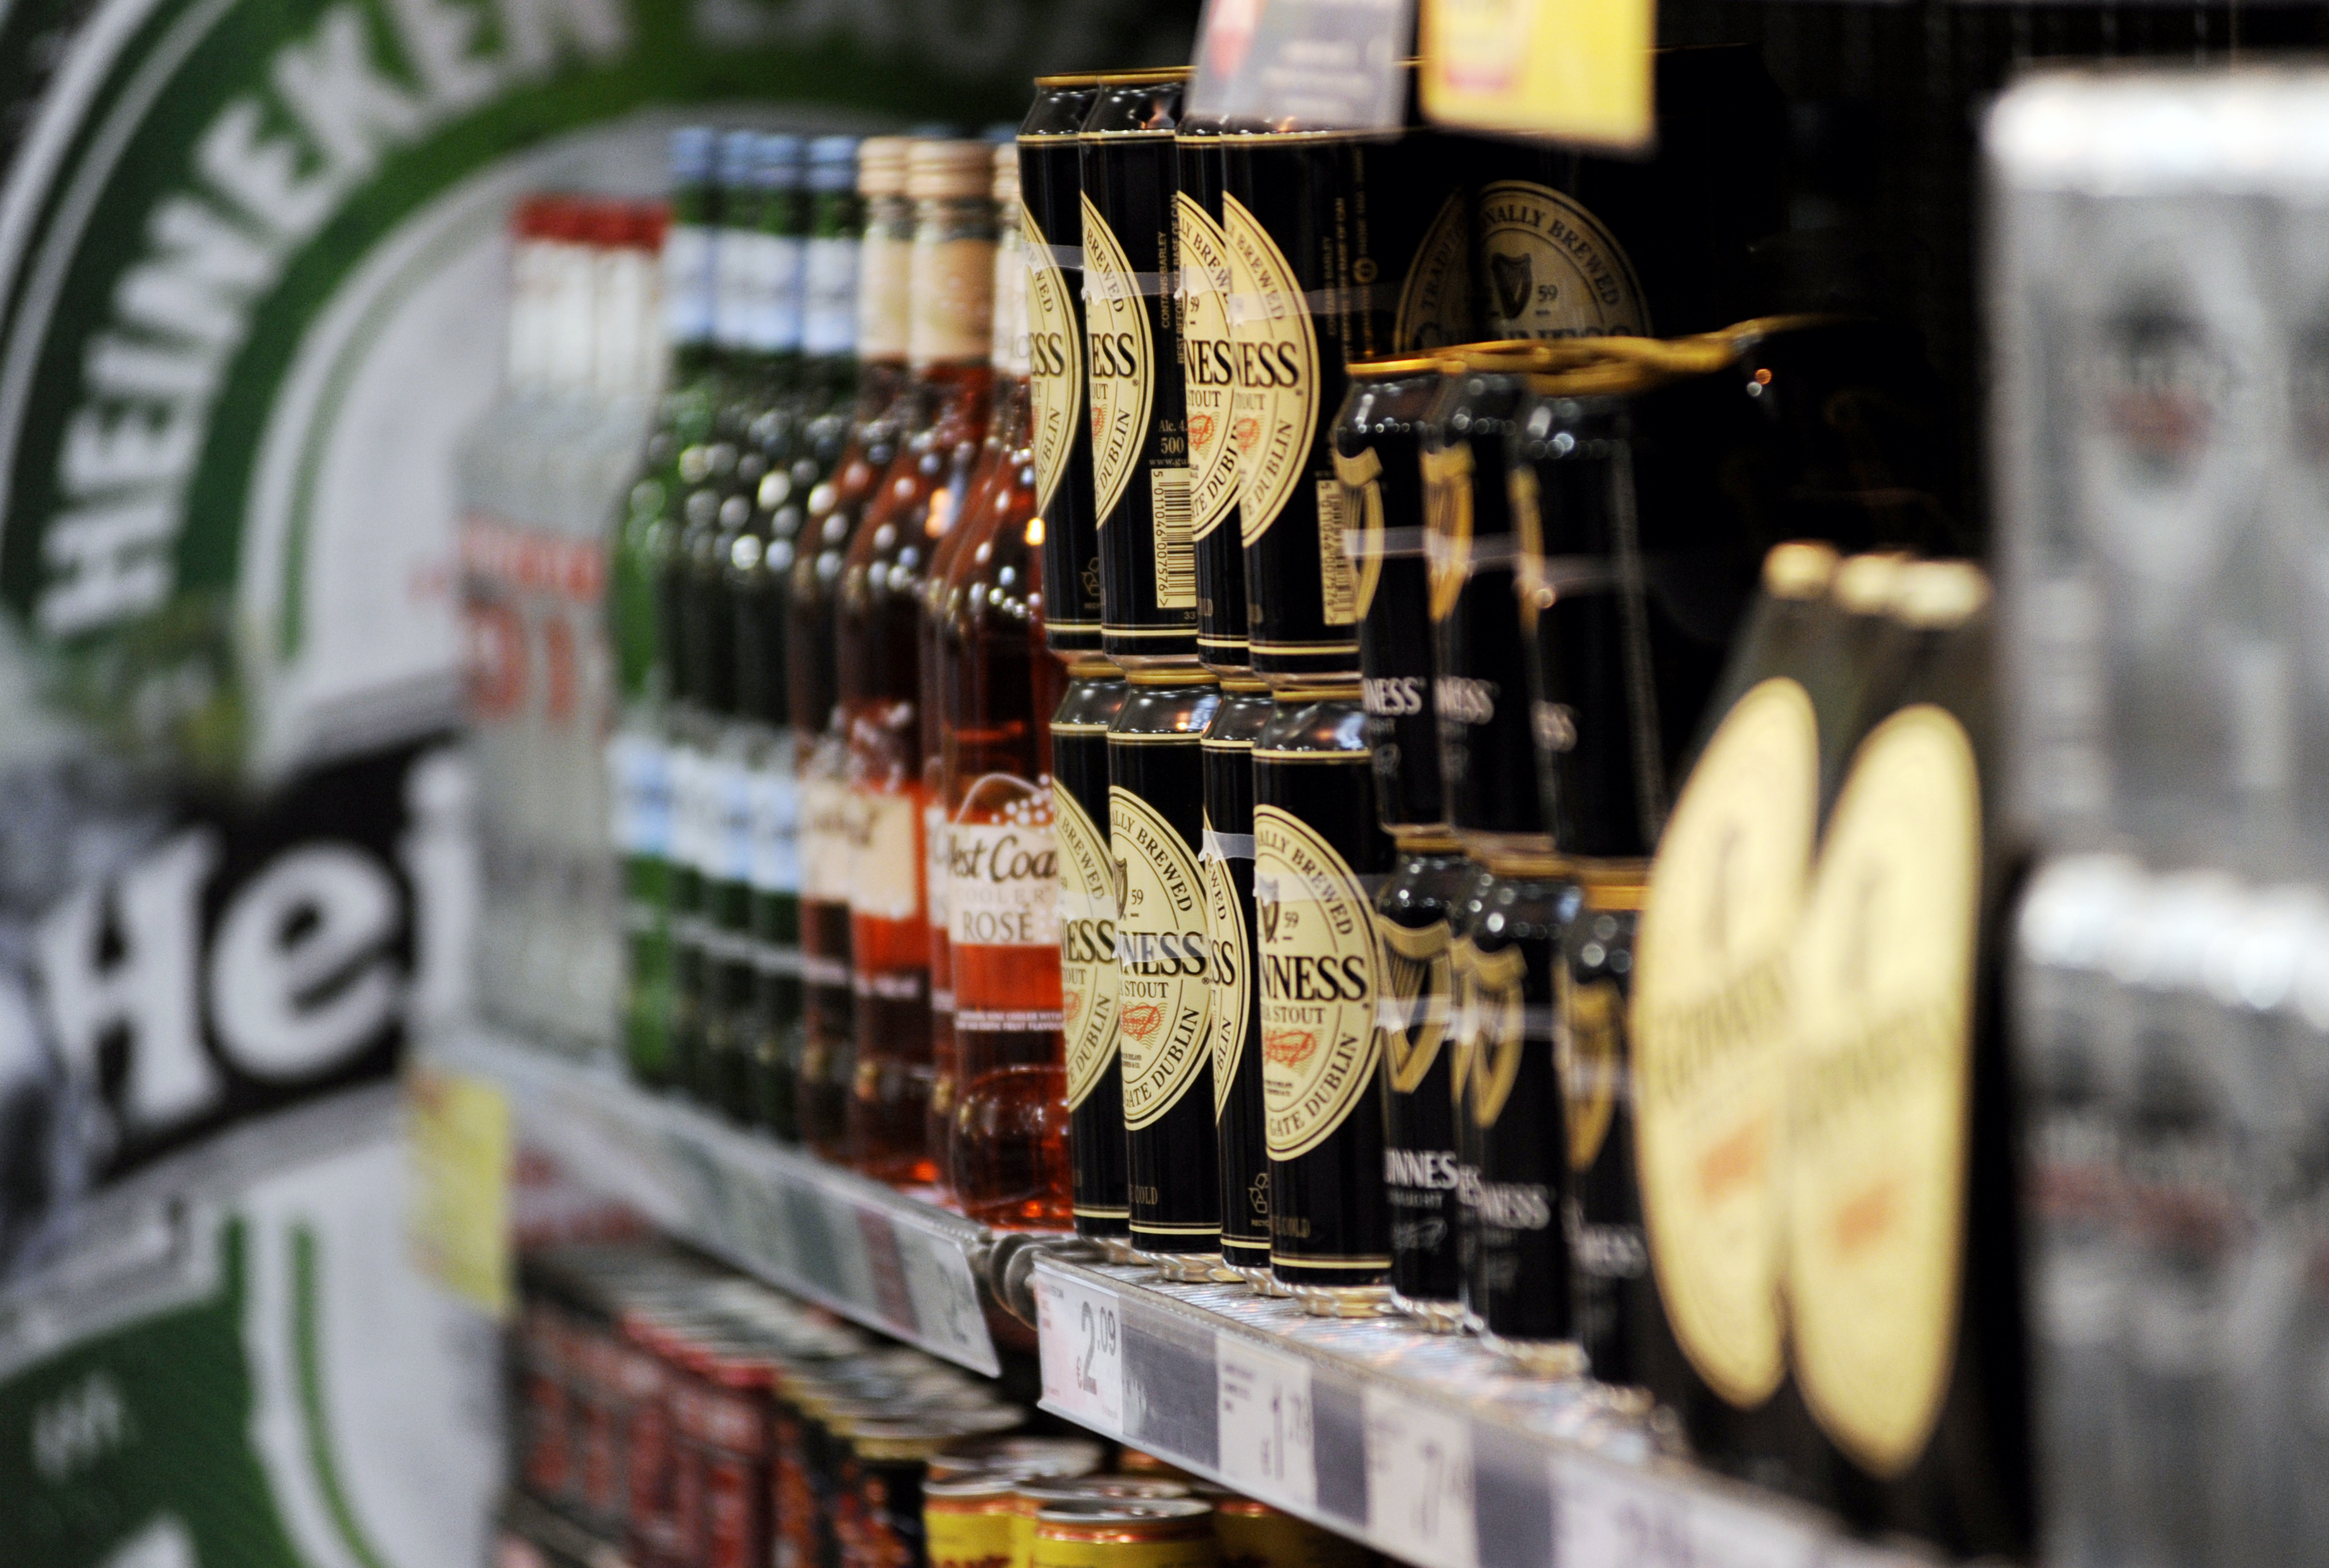 Off-trade beer prices were down annually by 3.6% last month.